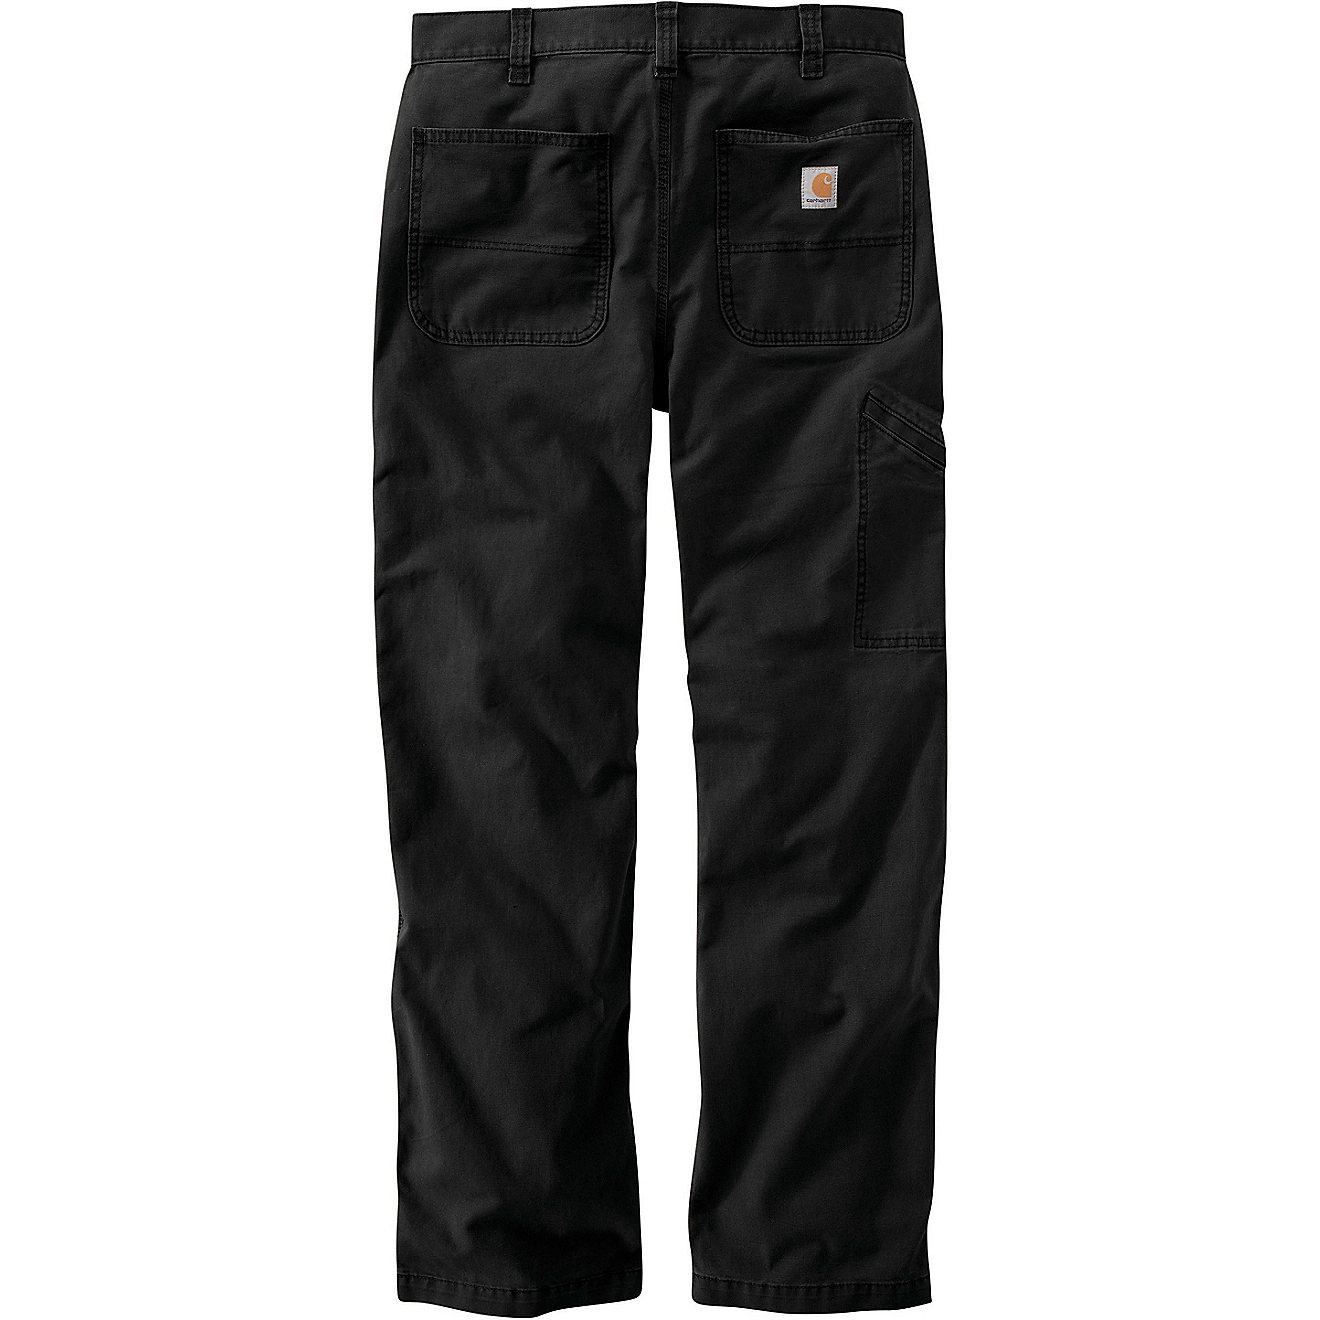 Carhartt Men's Rugged Flex Rigby Dungaree Work Pant                                                                              - view number 2